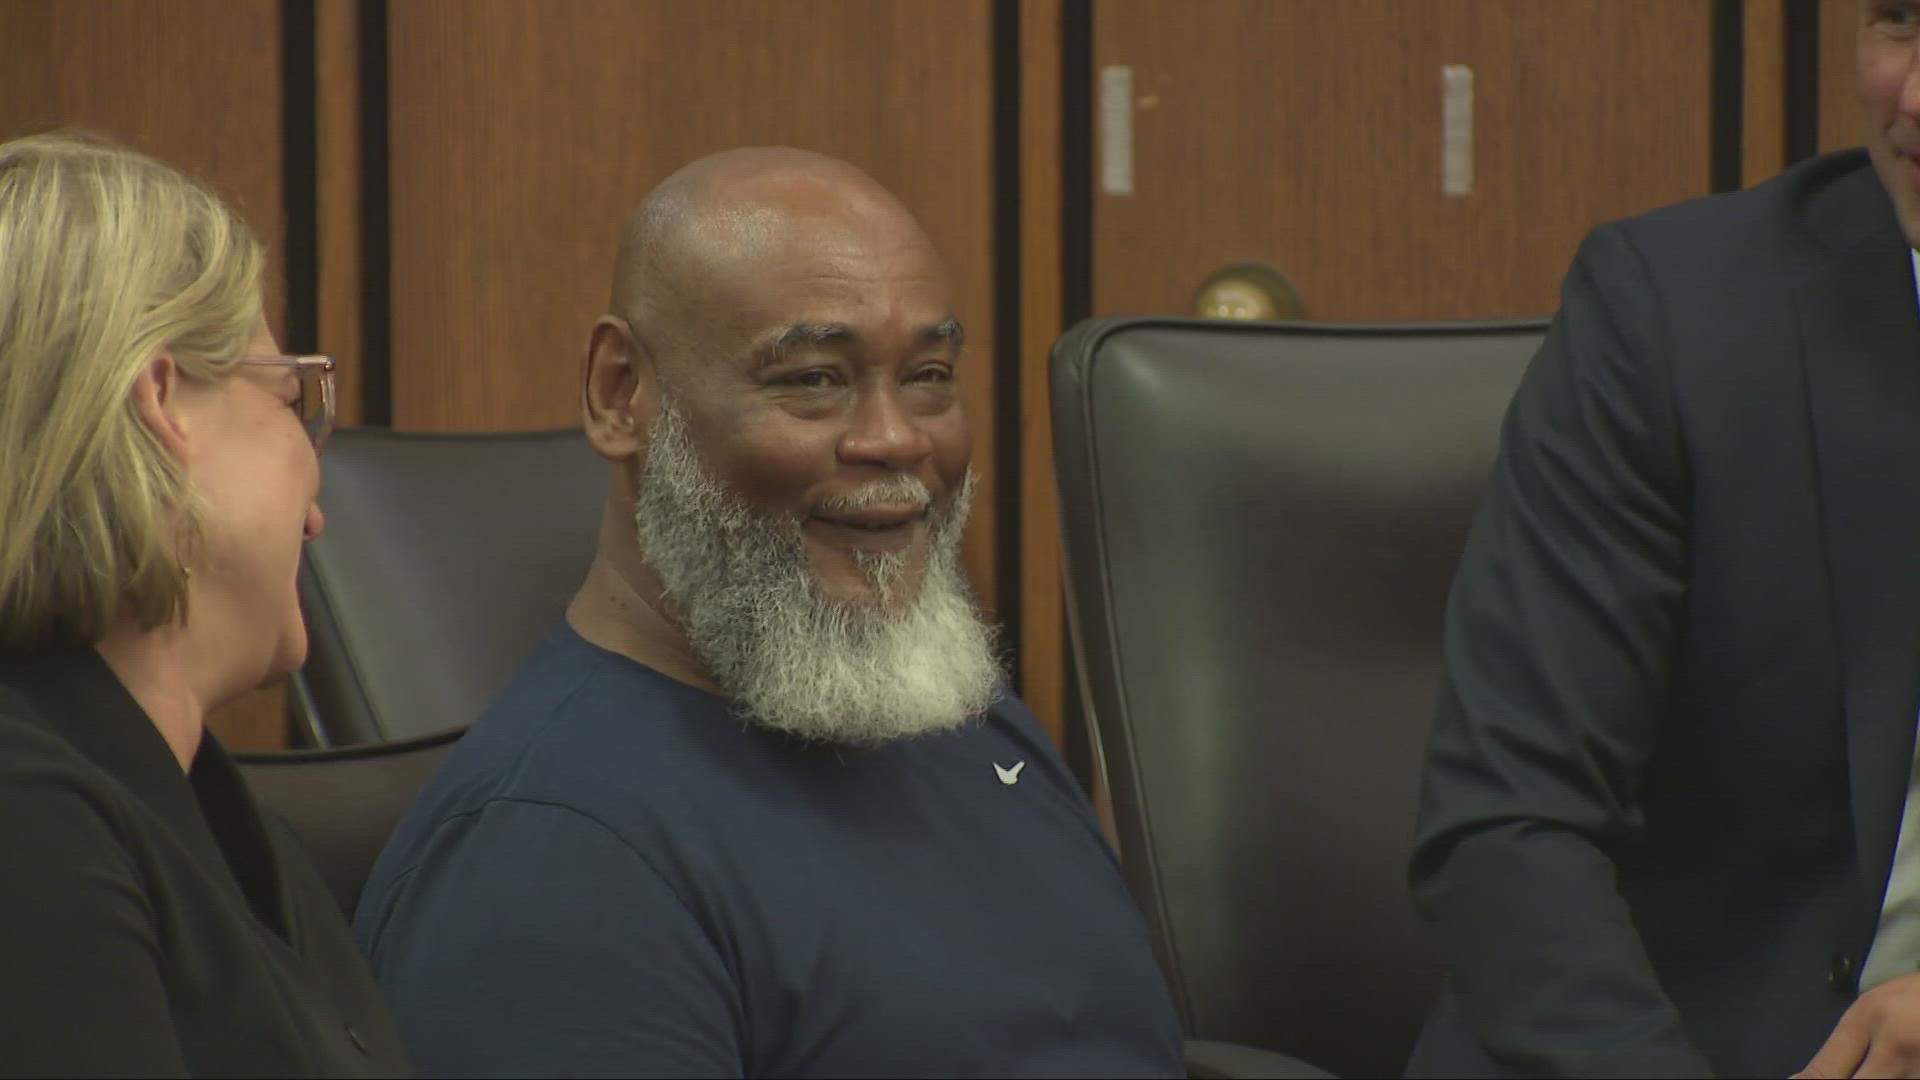 Charles Jackson missed 27 years of his life. Today in court, a judge said, 'I'm sorry.'